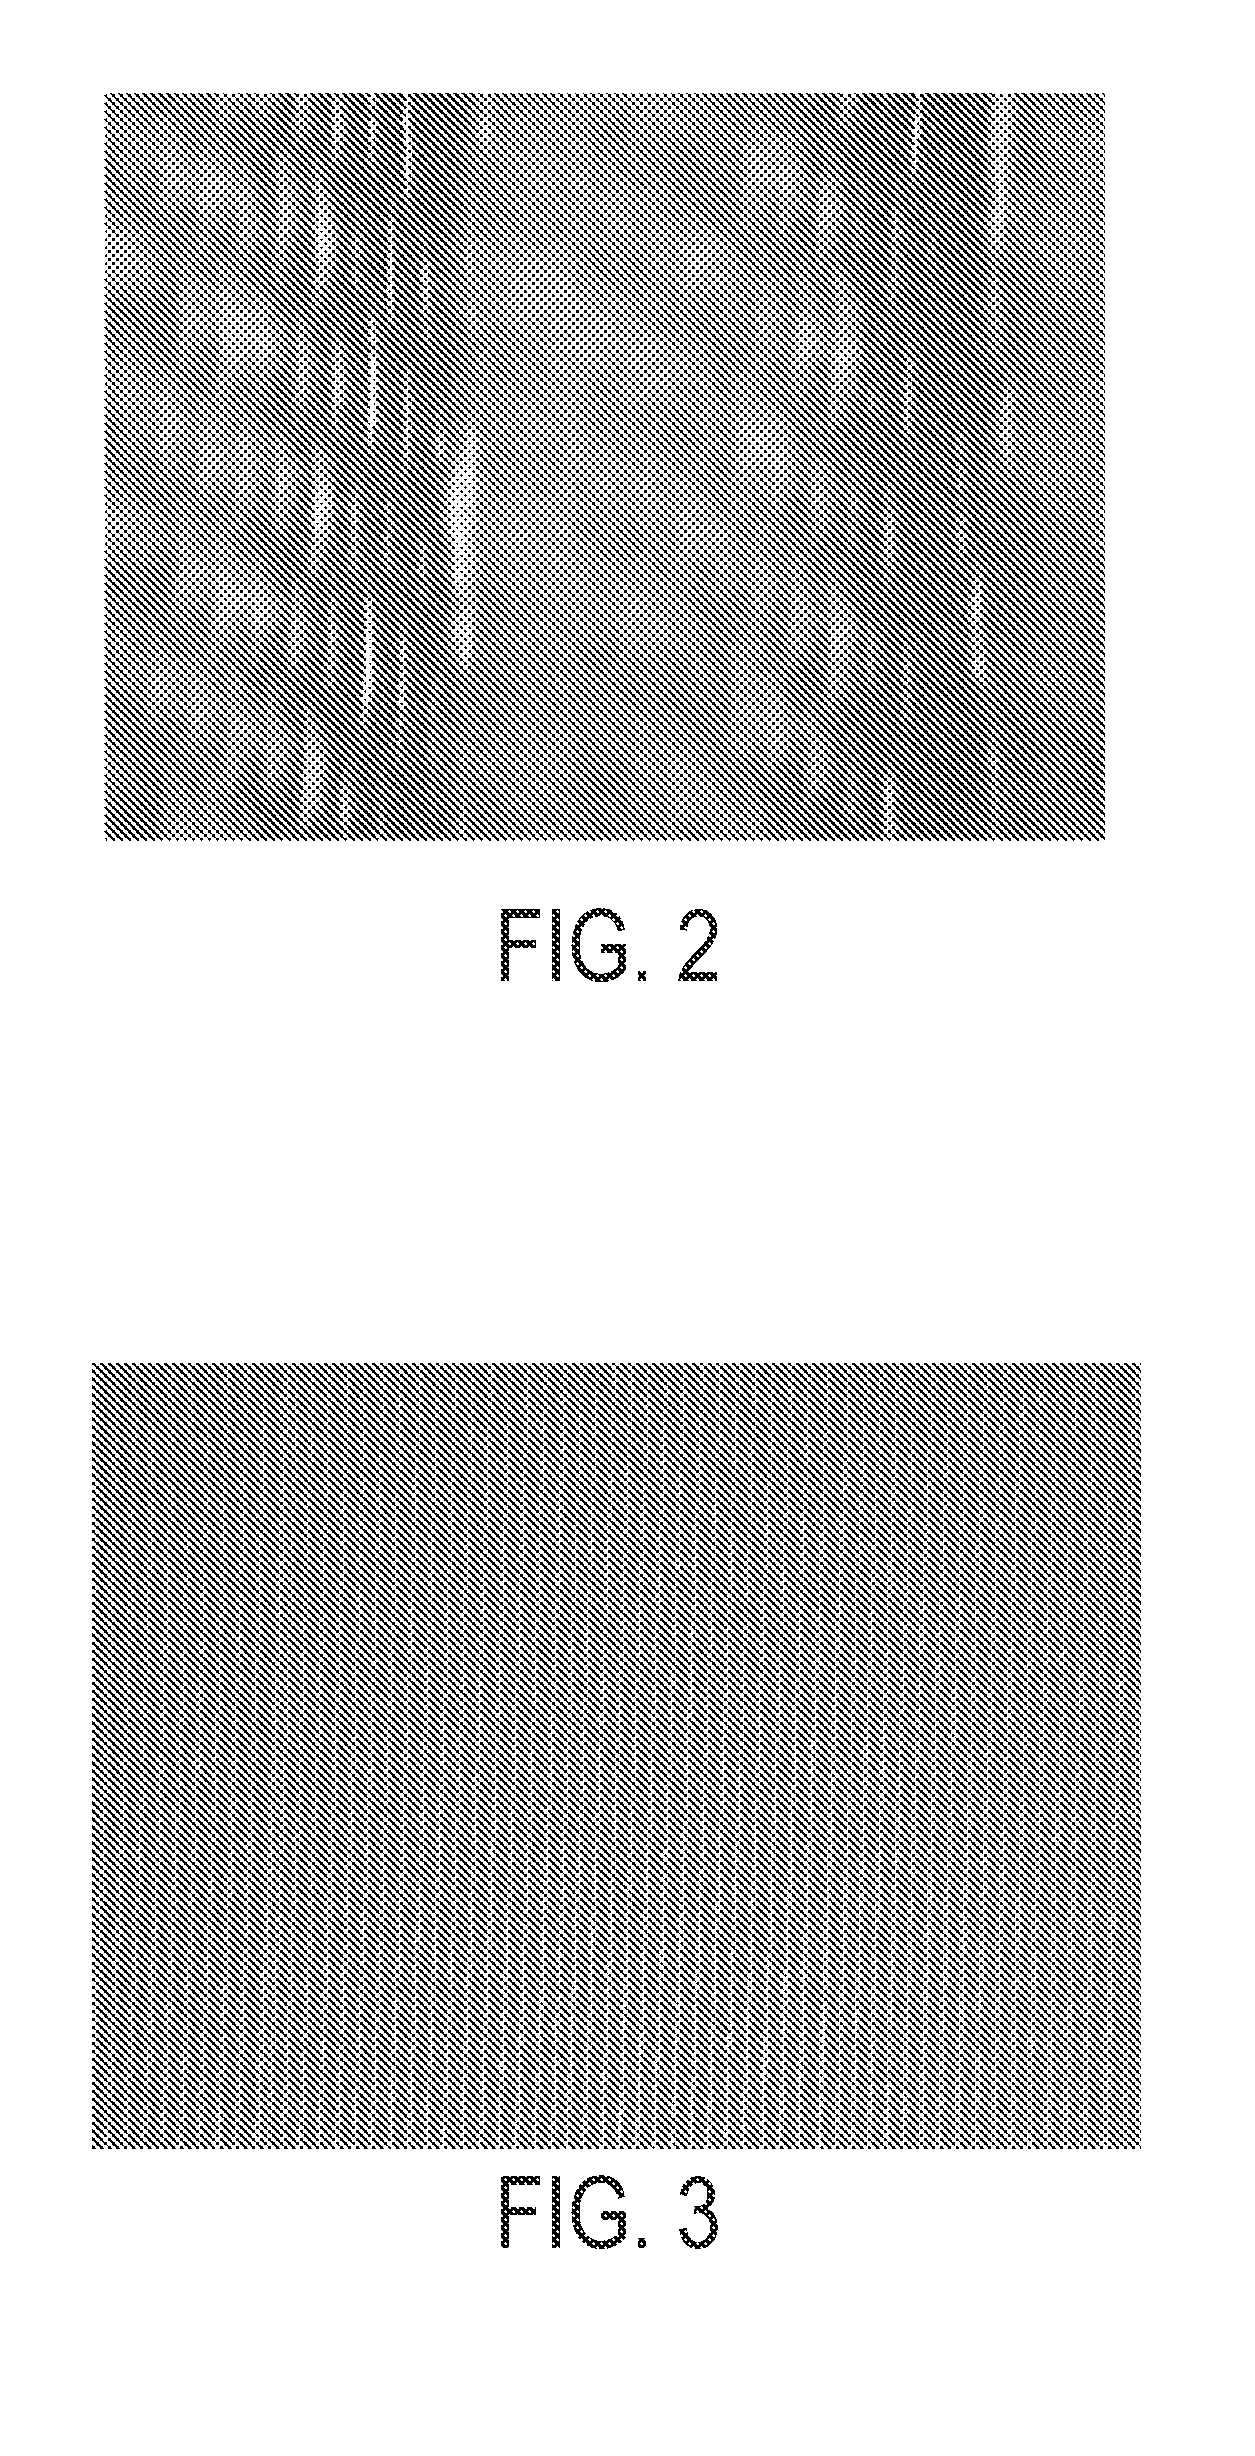 Method for decimation of images